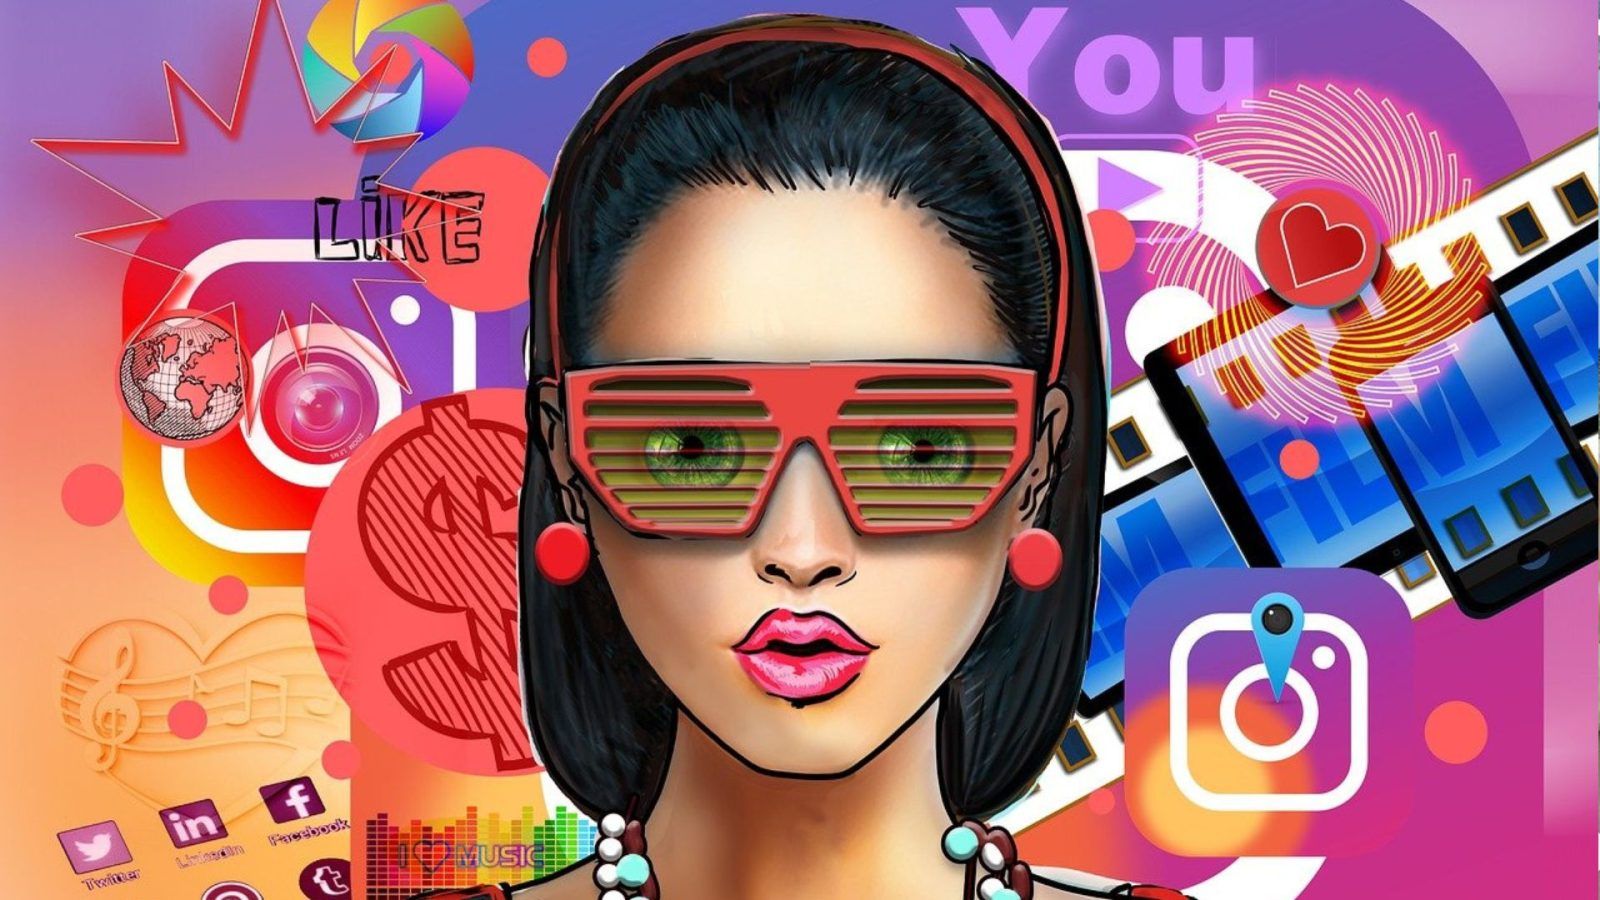 How to Add Music to an Instagram Post, Reel, or Story in 2023